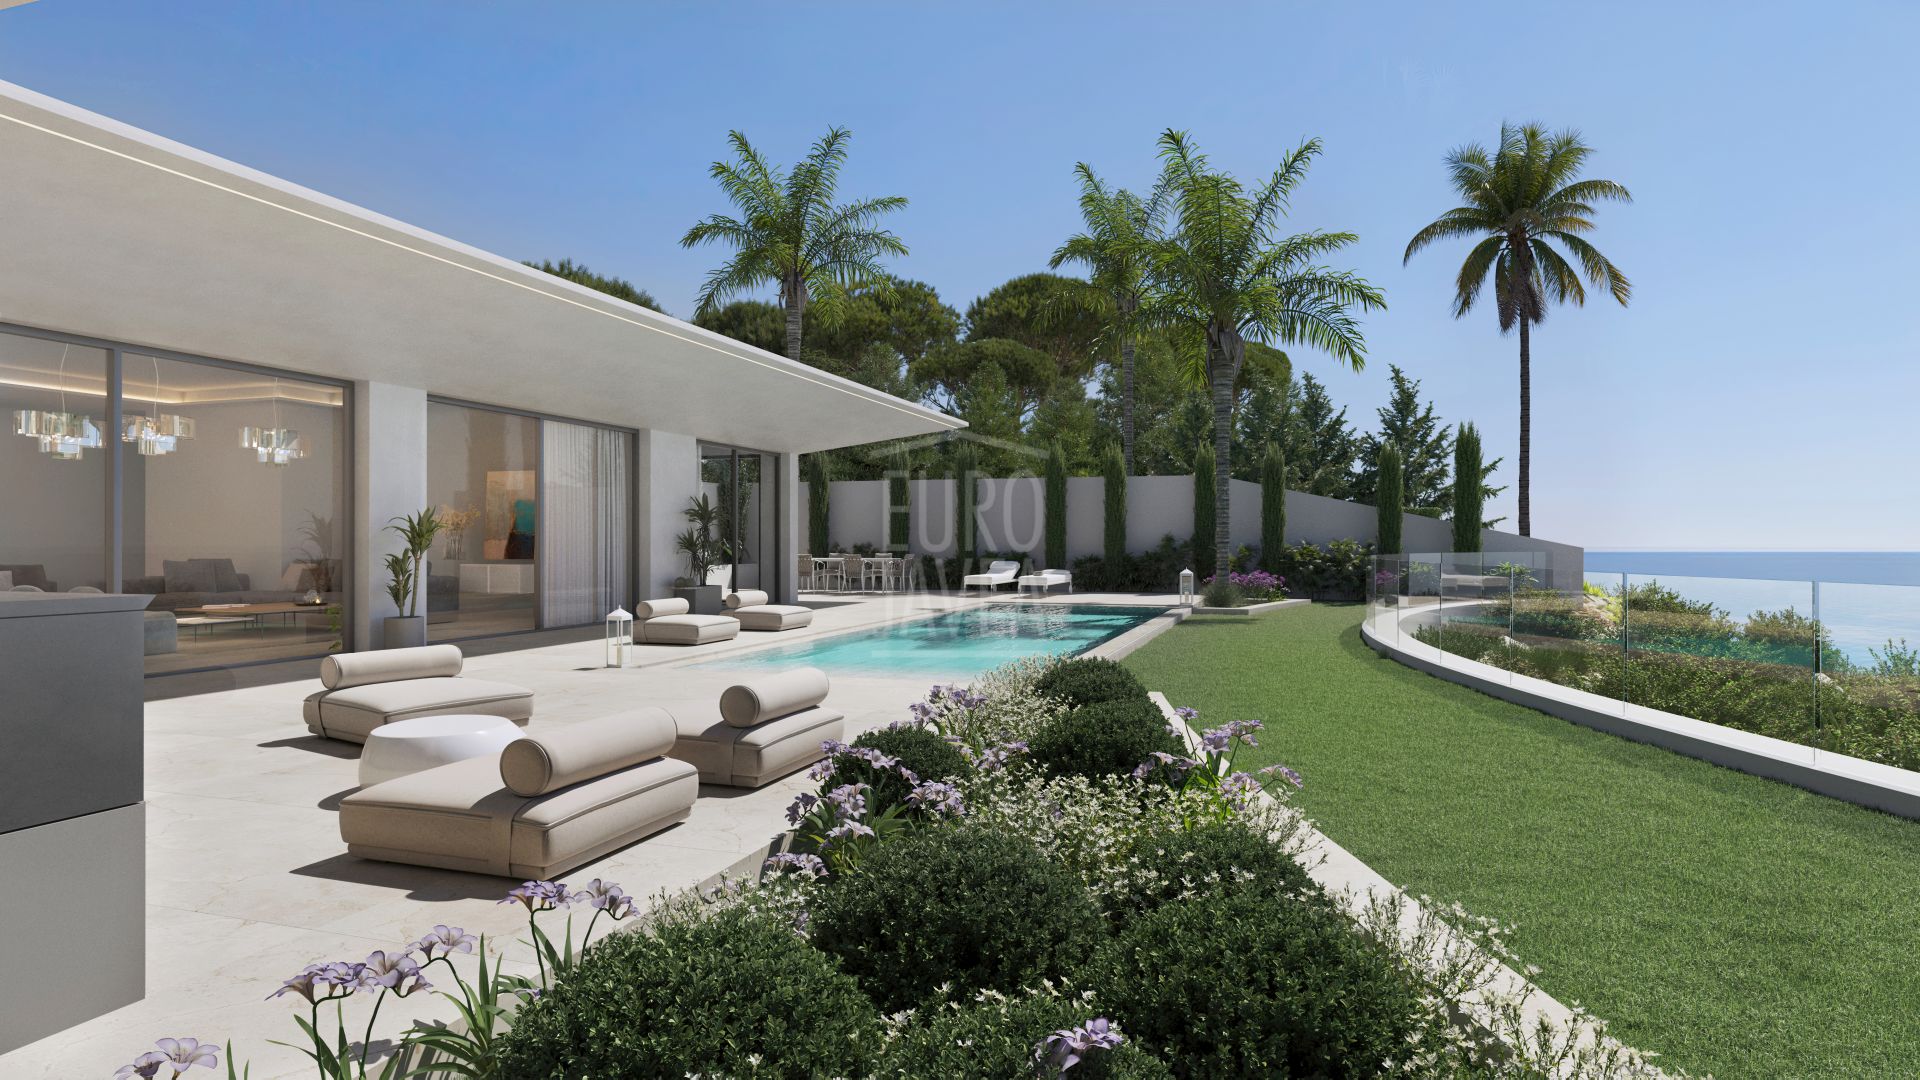 New front line villa project with stunning sea views in the area of Balcón al mar in Jávea